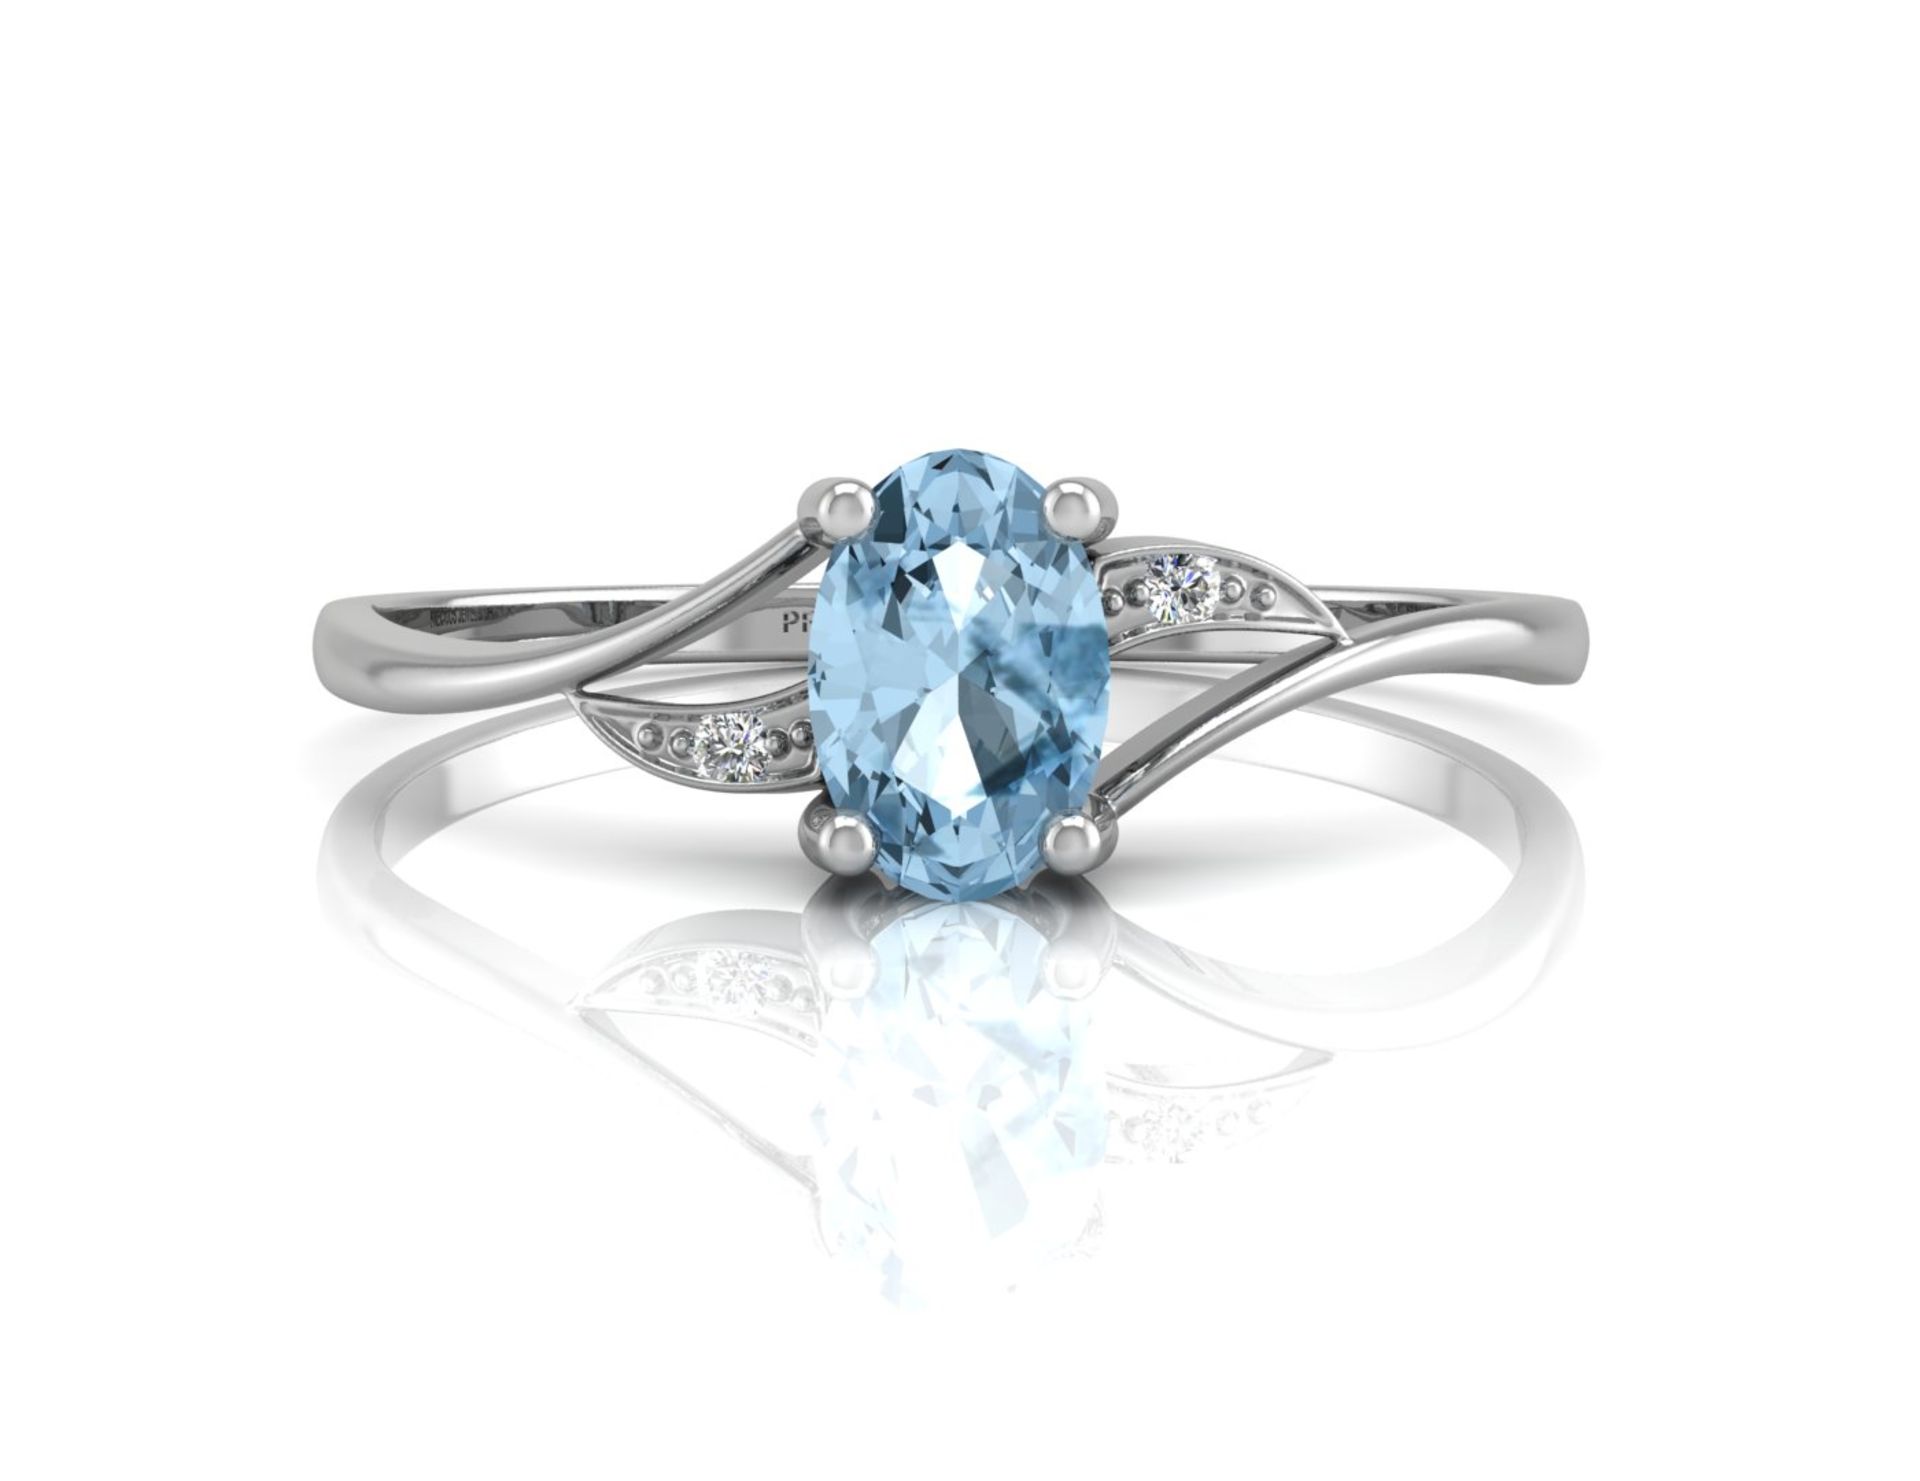 9k White Gold Diamond And Blue Topaz Ring 0.01 Carats - Image 4 of 5